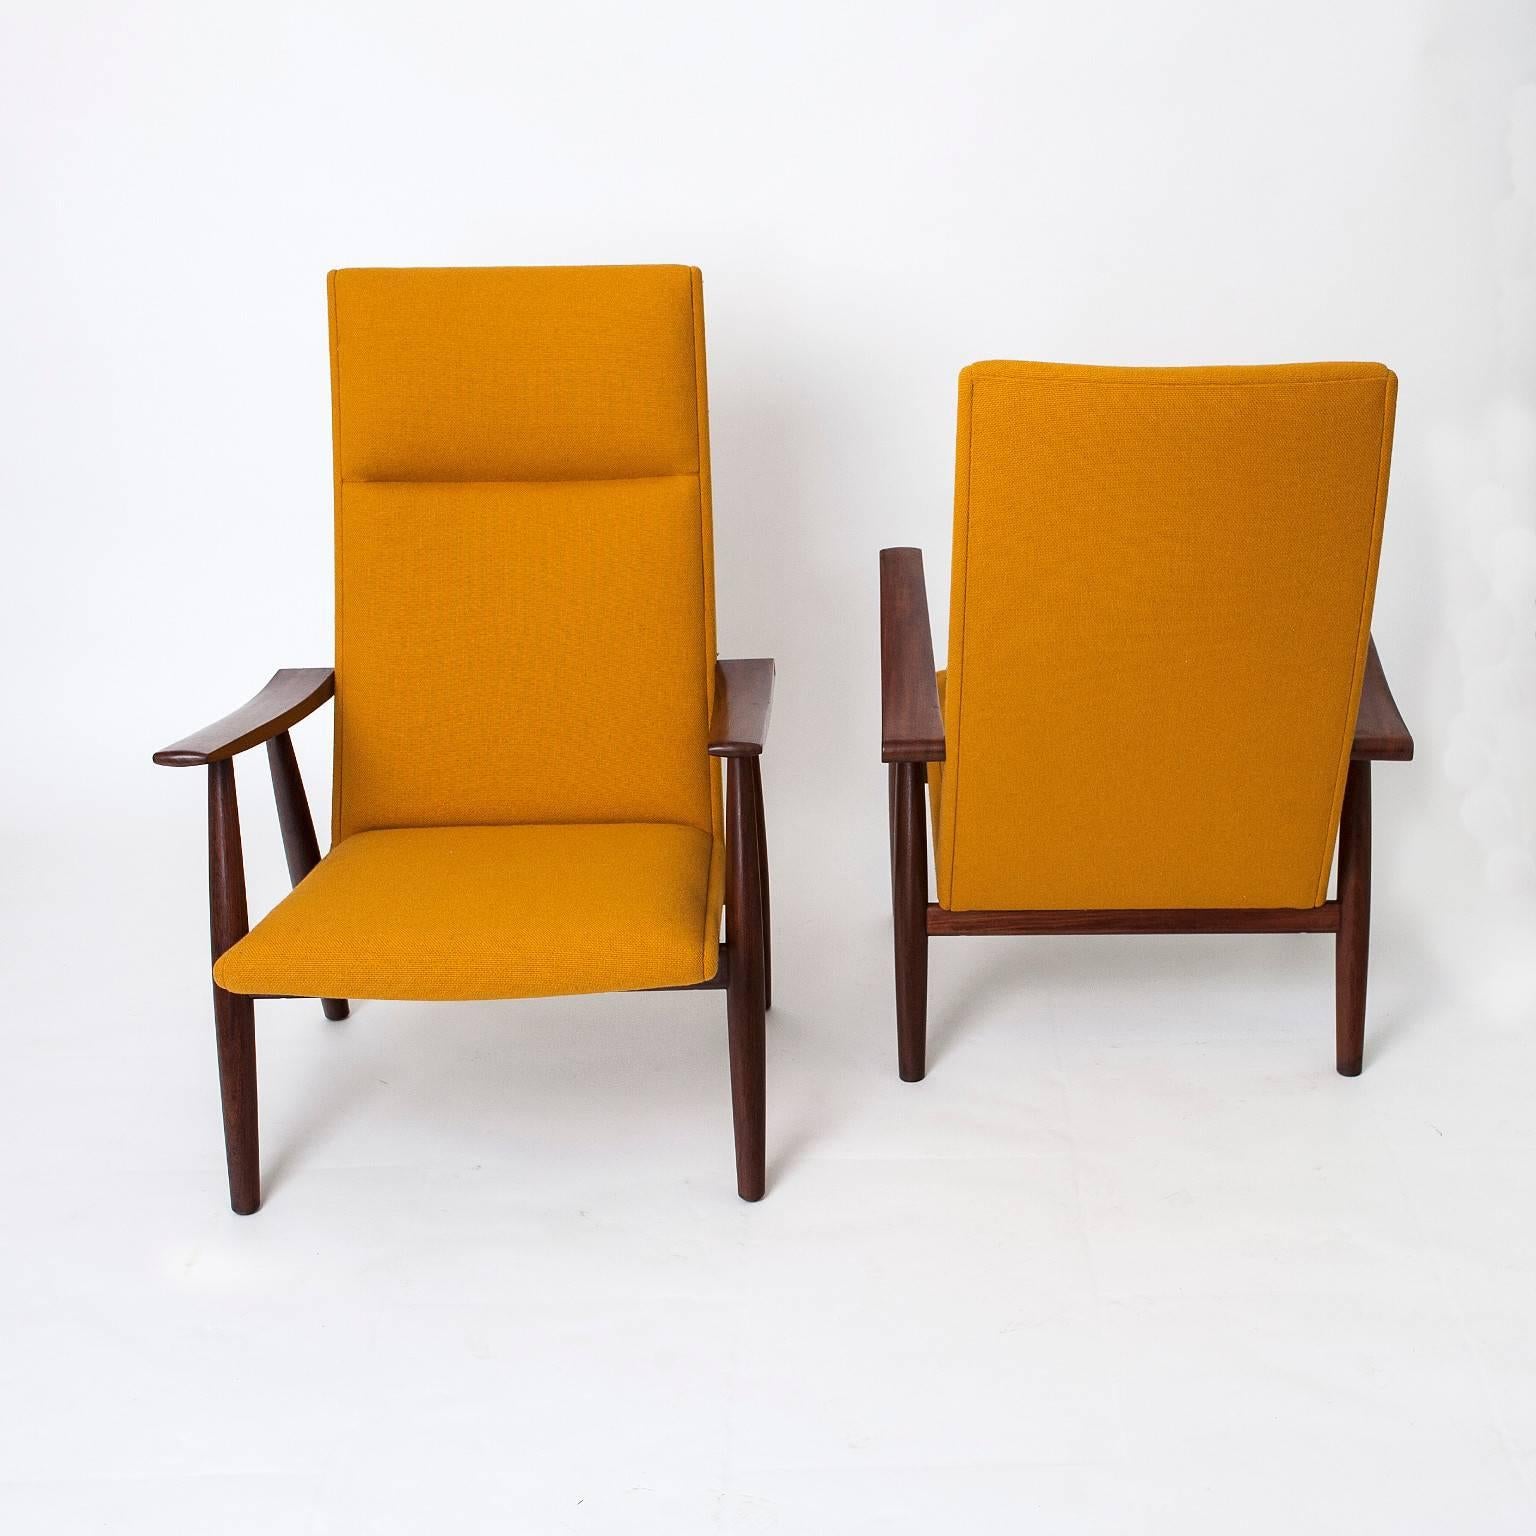 This is an original Hans Wegner designed GE 260A high back lounge chair, produced by Getama, Denmark. Made from a solid teak frame and upholstered in Midas fabric. The 260A lounge chairs differ from some of the more common Wegner designed chairs as